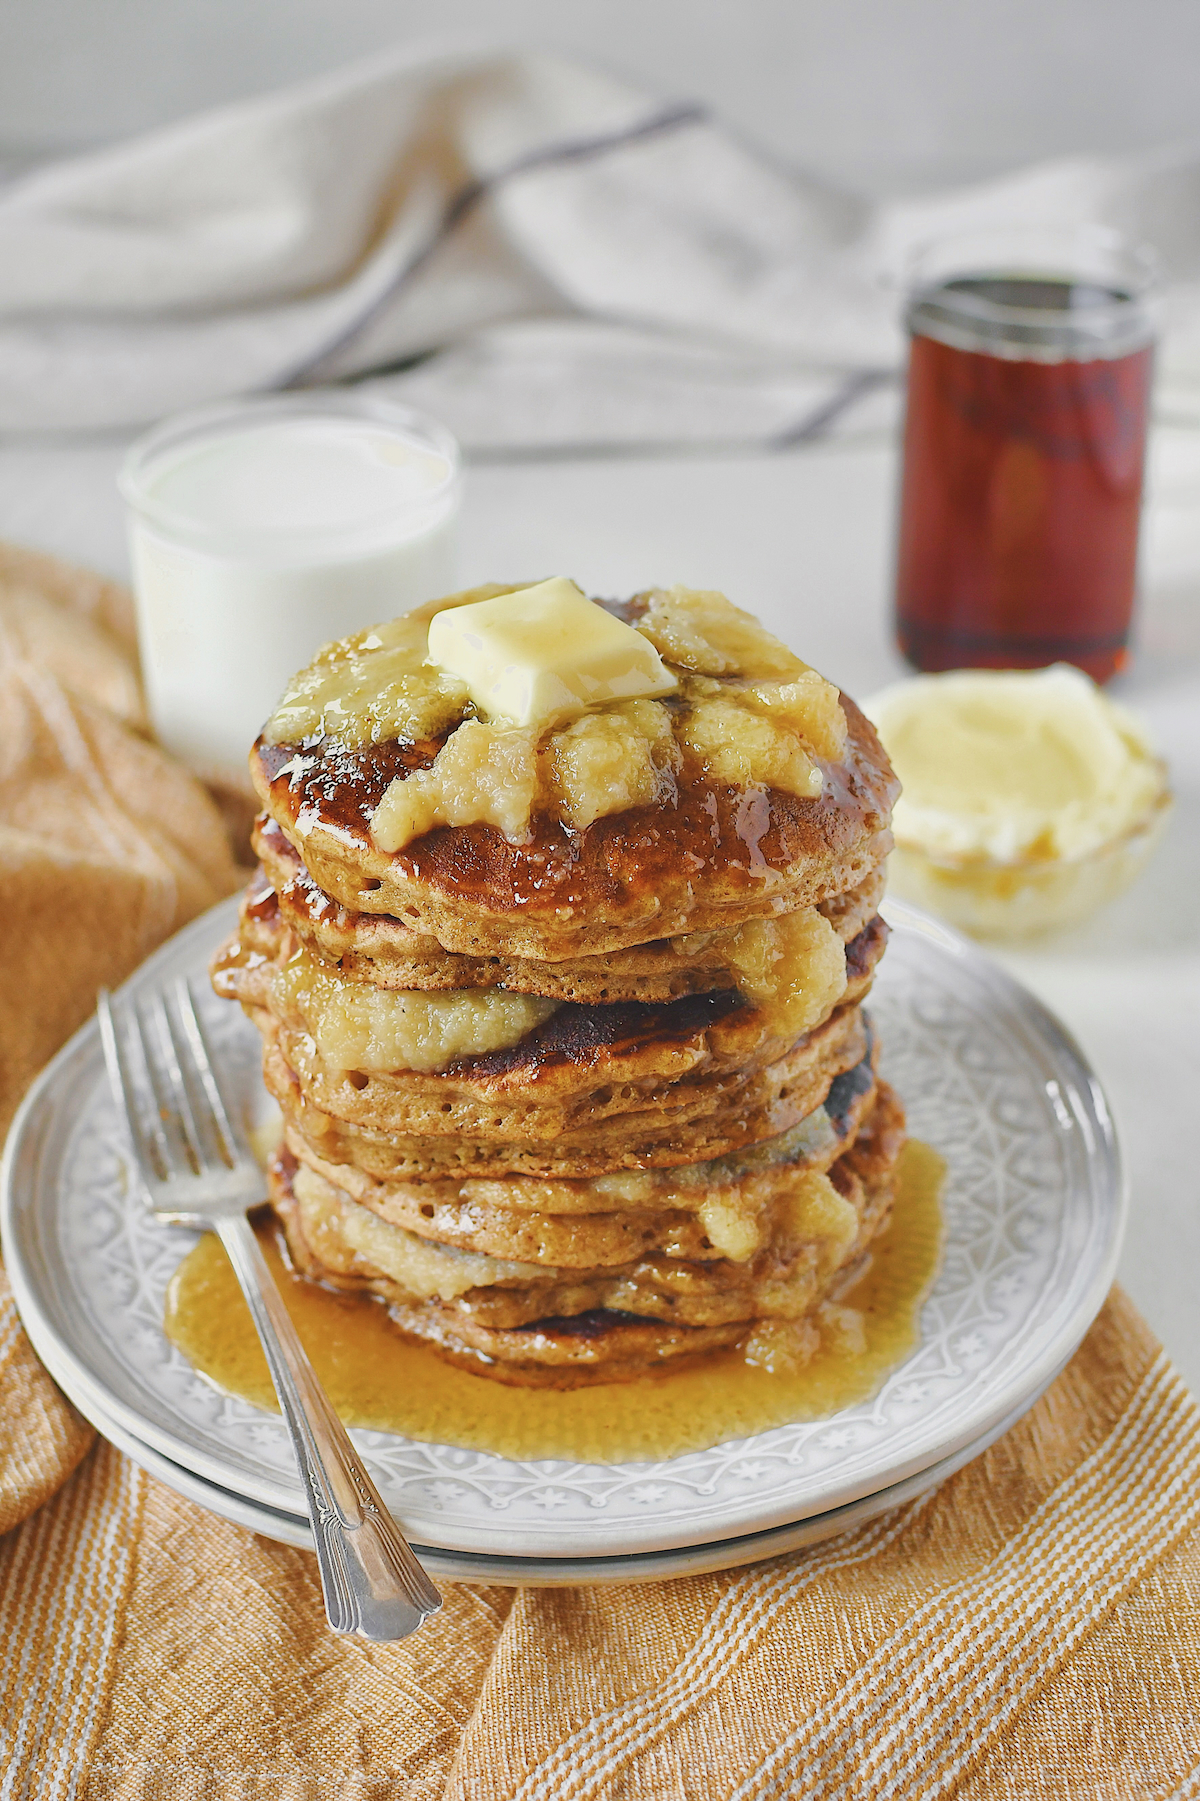 Applesauce Pancakes stacked high, with applesauce in between and on top. Topped with a pat of butter and lots of real maple syrup.